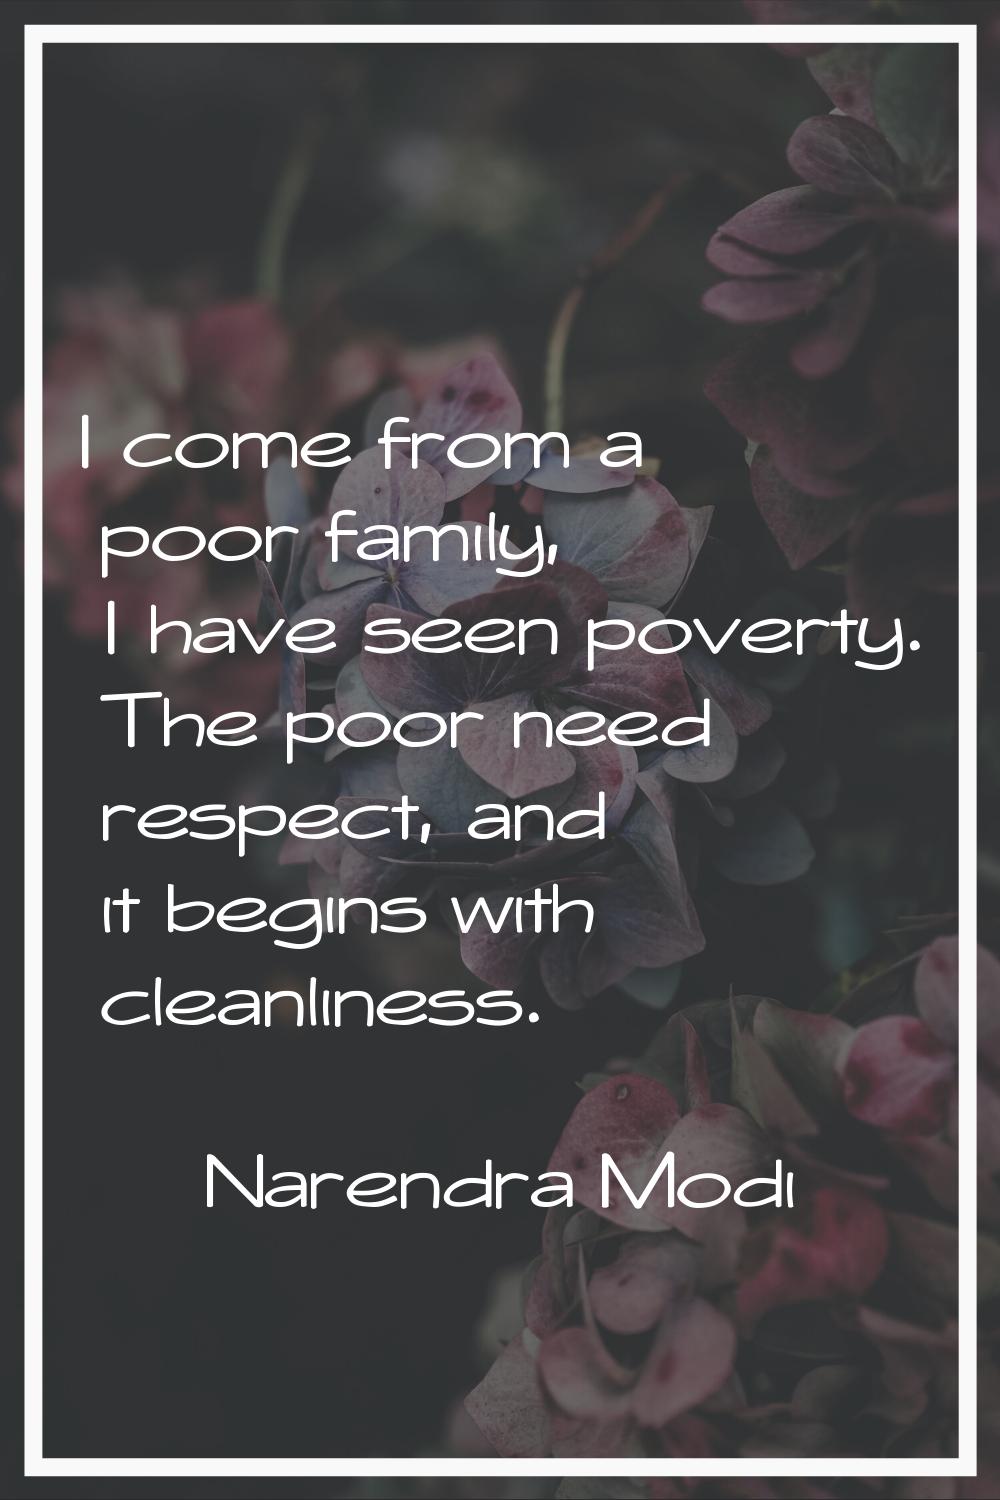 I come from a poor family, I have seen poverty. The poor need respect, and it begins with cleanline